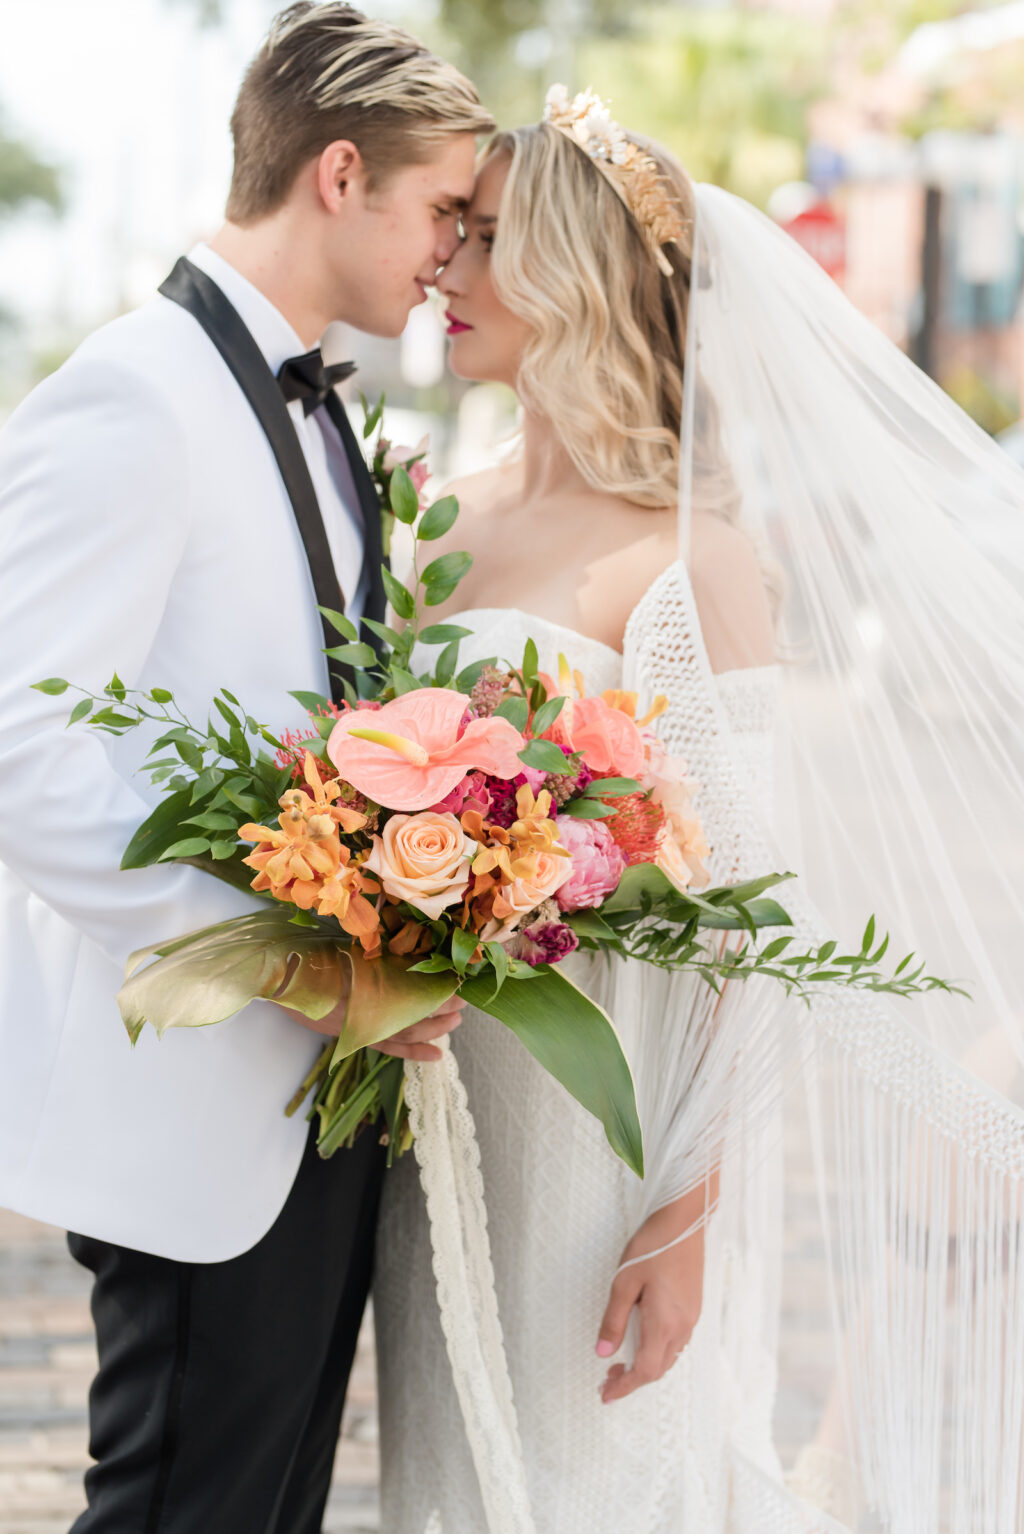 Vintage Bride Wearing Lace Strapless Sweetheart Neckline Fringe Off the Shoulder Sleeve Wedding Dress with Train, Gold Flower Crown Holding Colorful Tropical Floral Bouquet with Groom in White and Black Collar Tuxedo Standing in Streets of Tampa | Wedding Hair and Makeup Adore Bridal Hair and Makeup